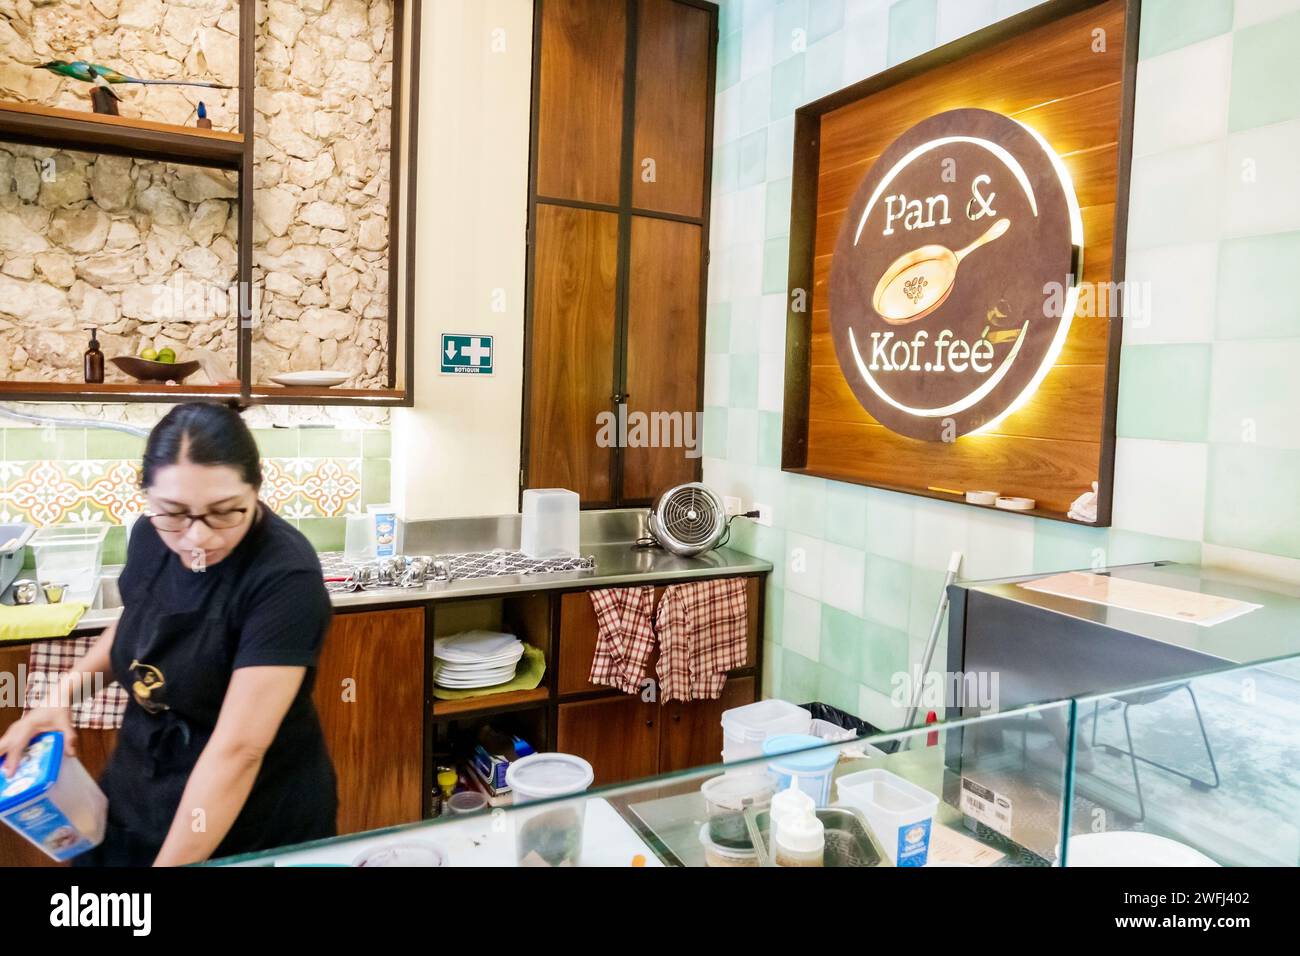 Merida Mexico,Zona Paseo Montejo Centro,Pan & Koffee Kof.fee cafe coffee shop,inside interior,woman women lady female,adult adults,resident,residents, Stock Photo